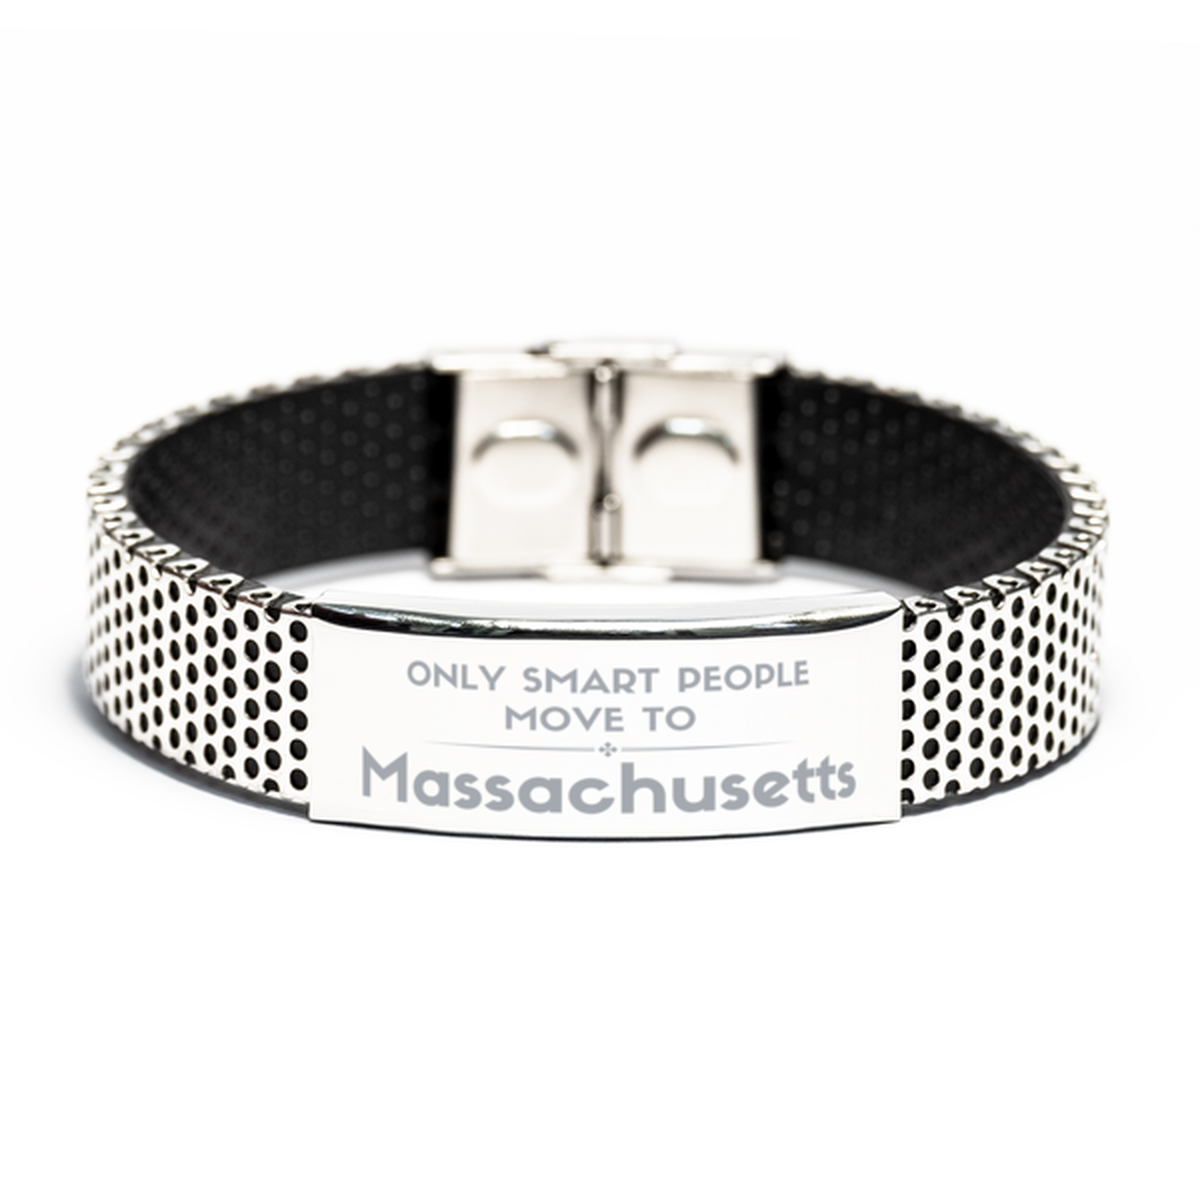 Only smart people move to Massachusetts Stainless Steel Bracelet, Gag Gifts For Massachusetts, Move to Massachusetts Gifts for Friends Coworker Funny Saying Quote